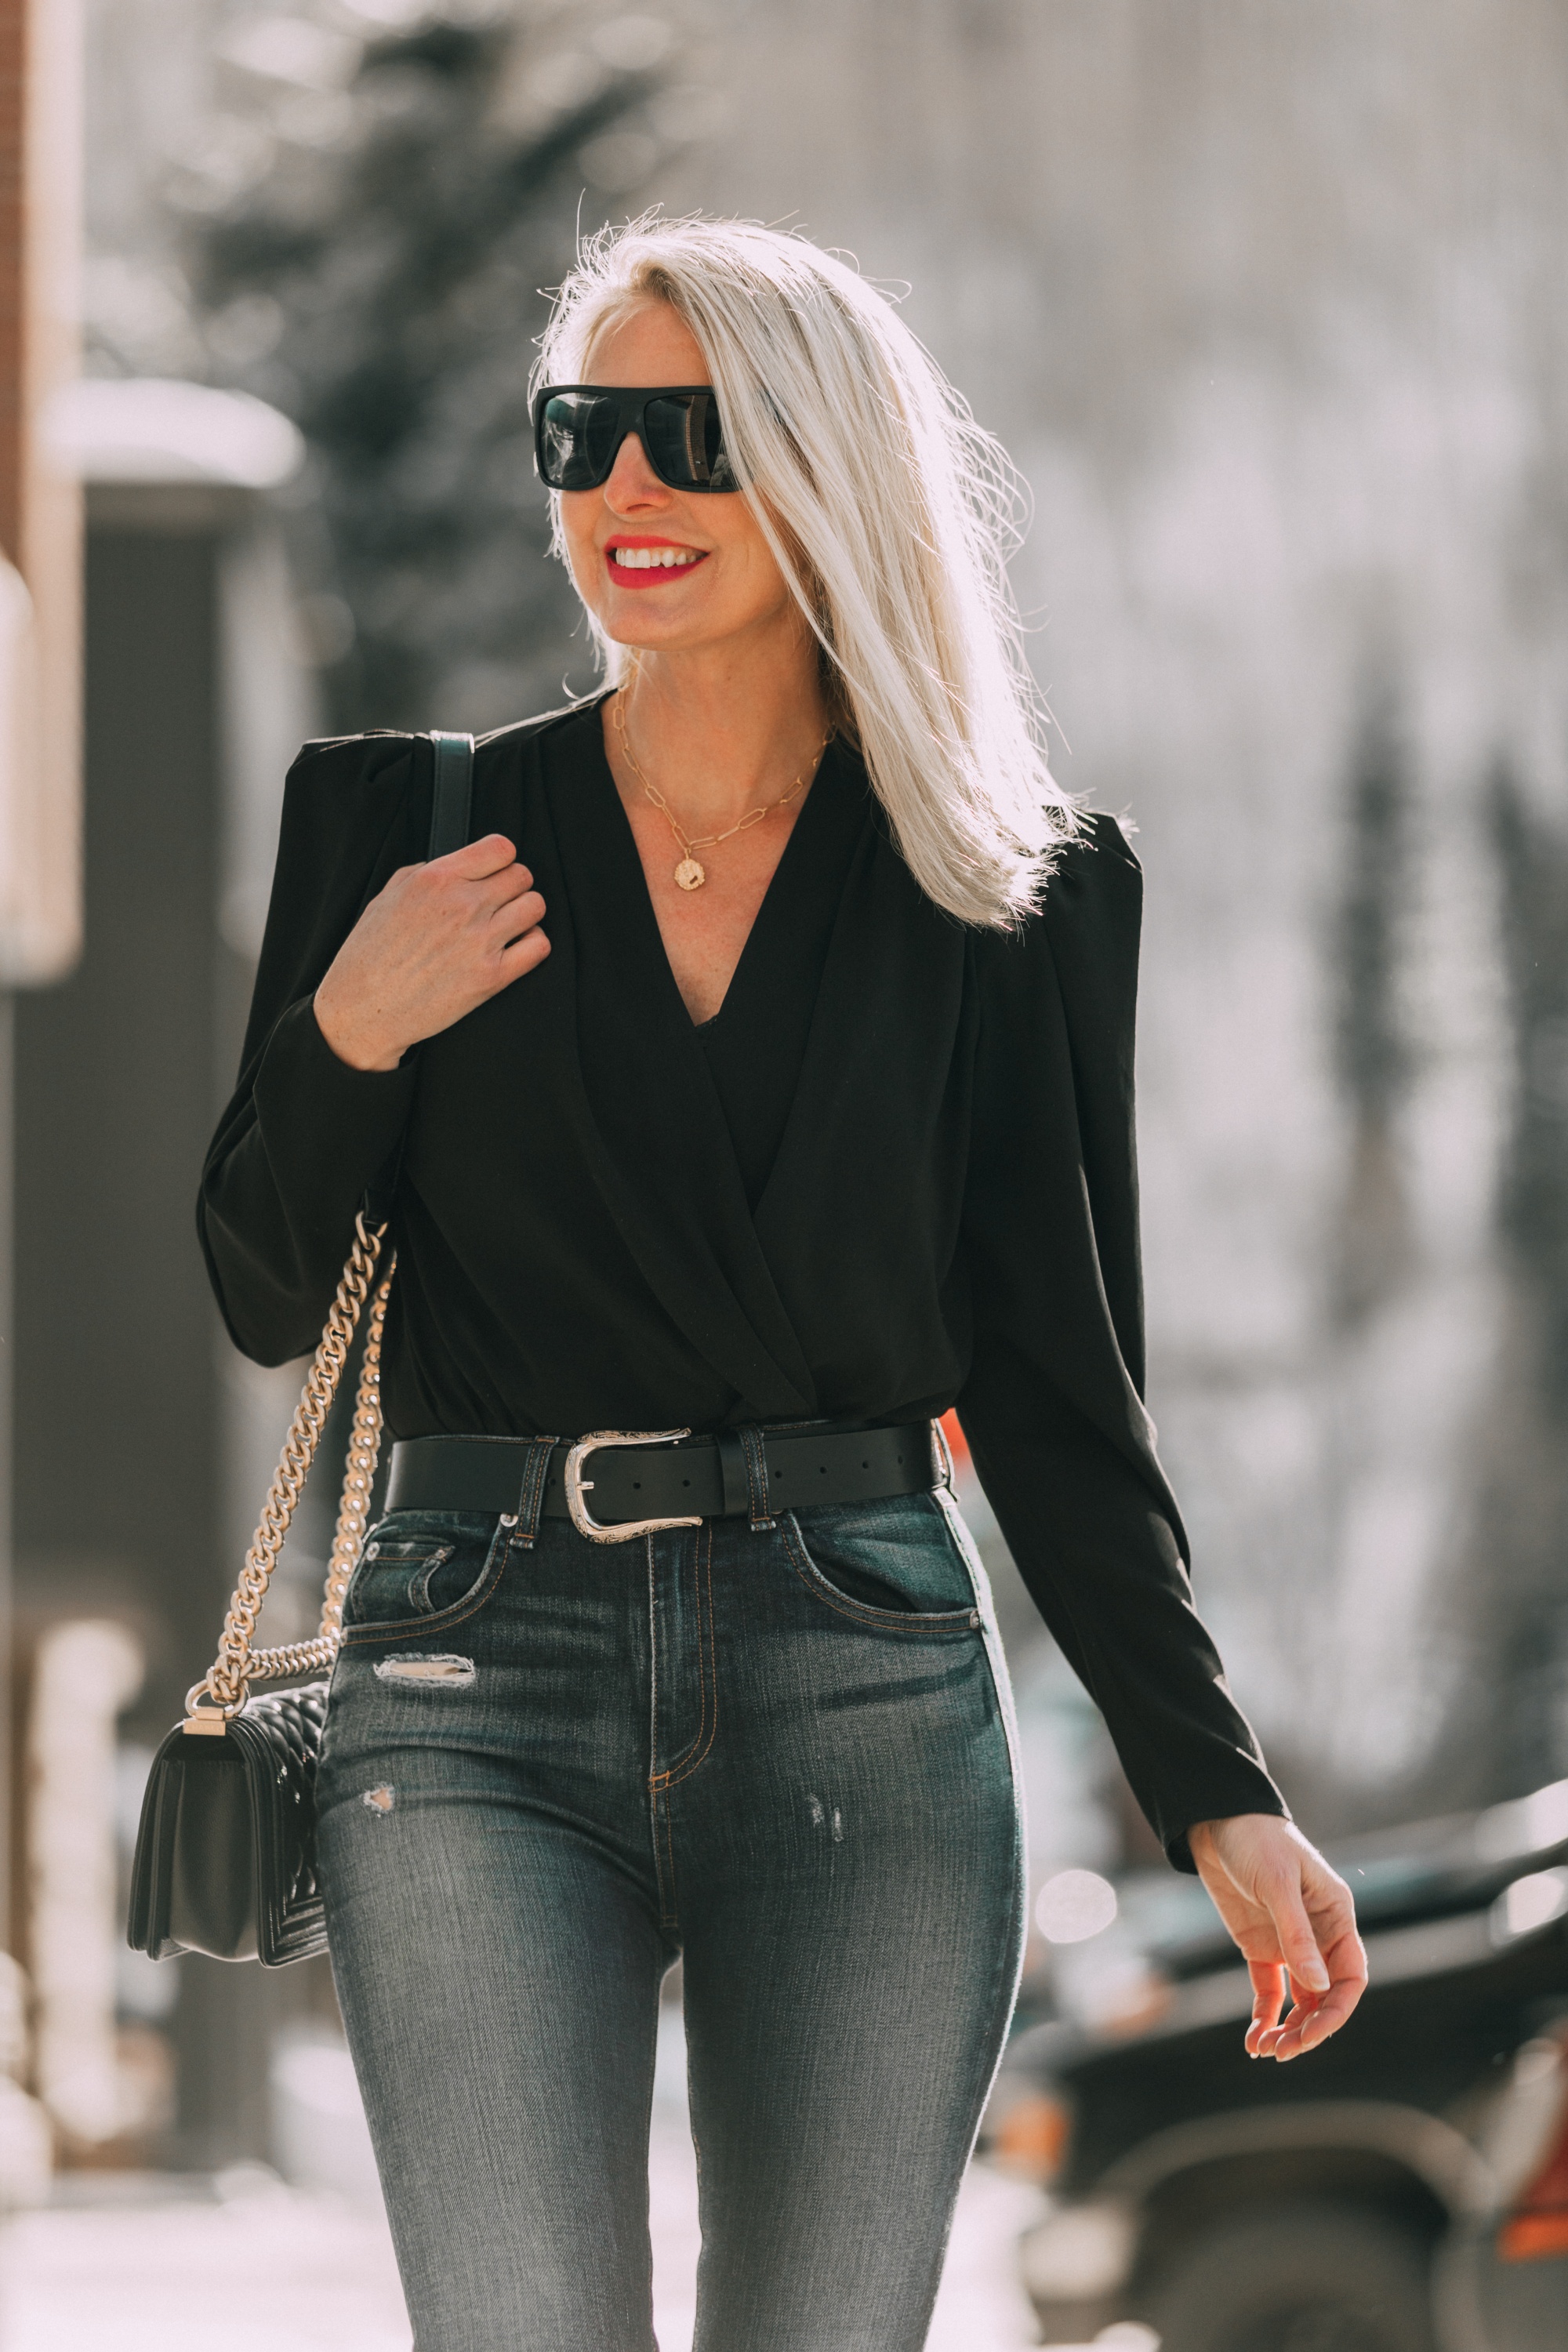 Women's fashion blogger, Erin Busbee shares 13 style hacks for women over 40 who love fashion. Here, she wears double sided fashion body tape.